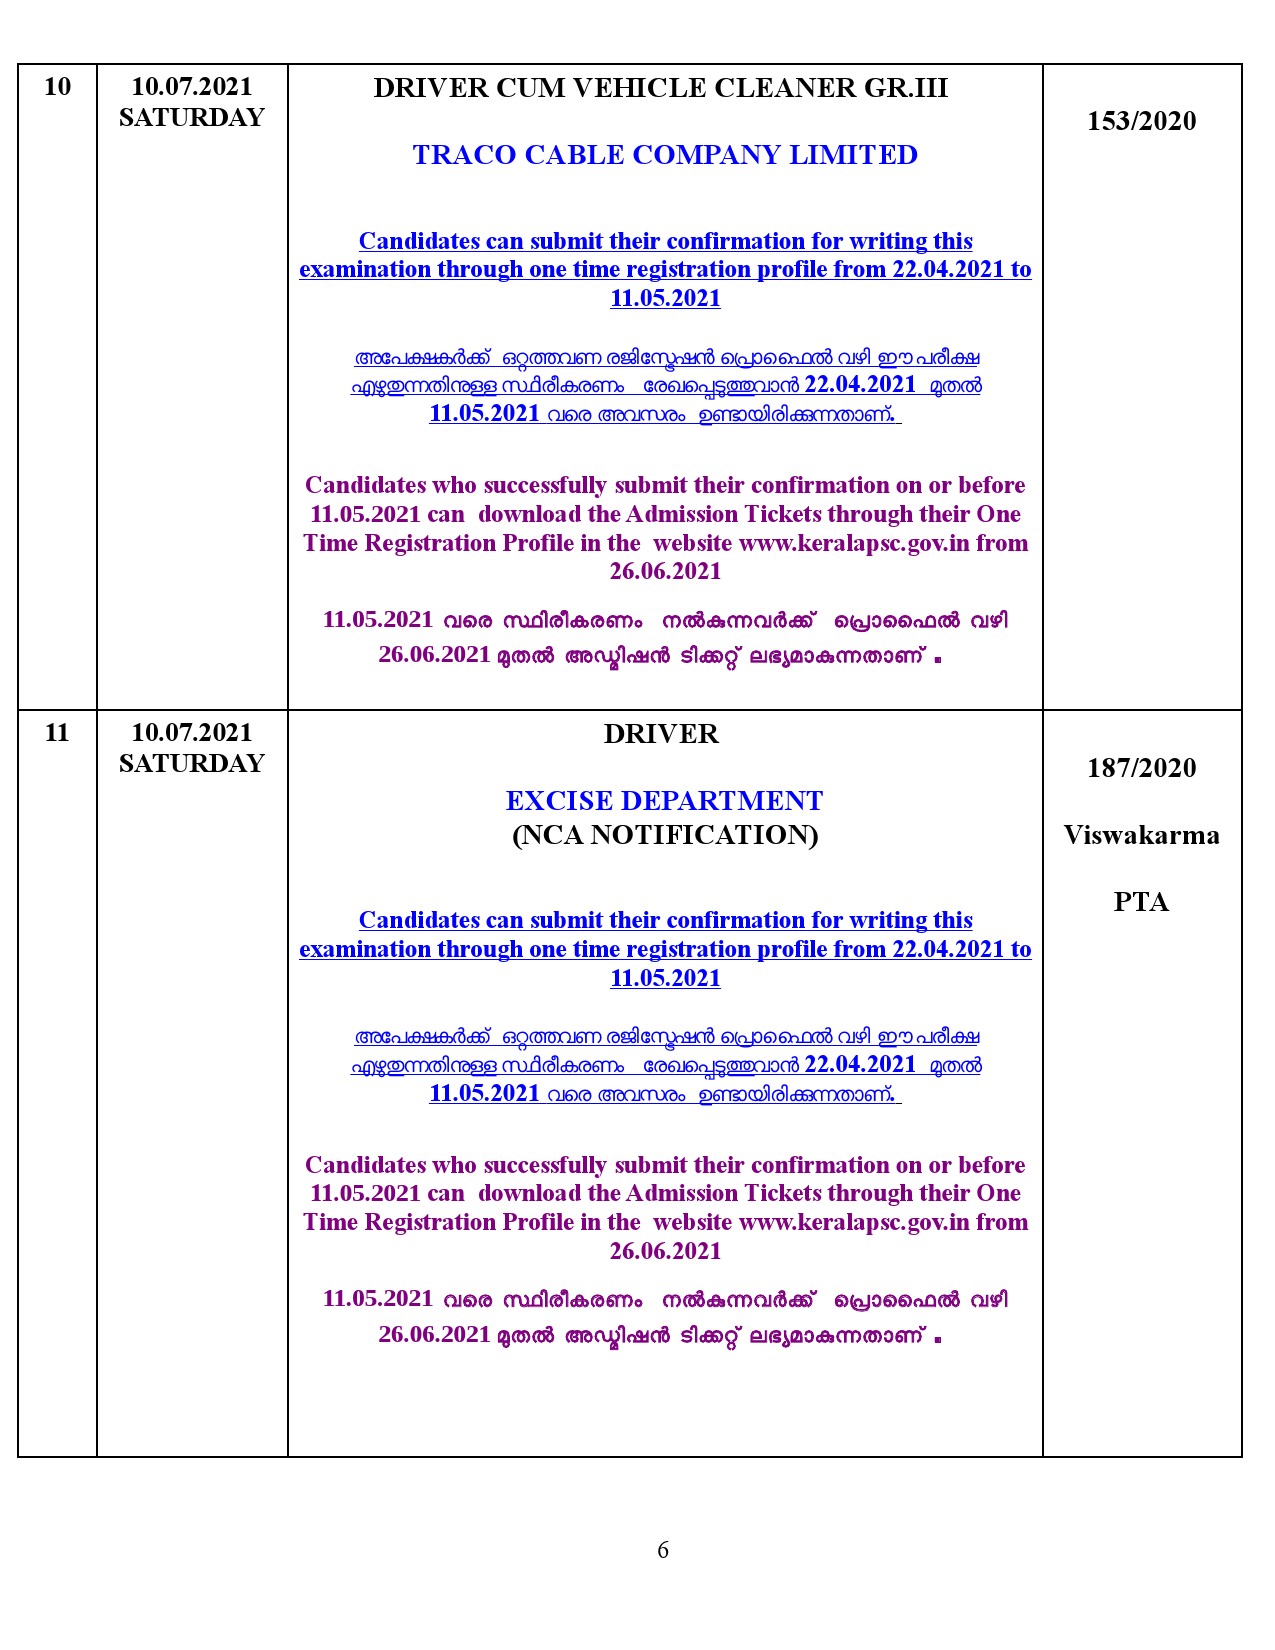 KPSC Examination Programme For The Month Of July 2021 - Notification Image 6